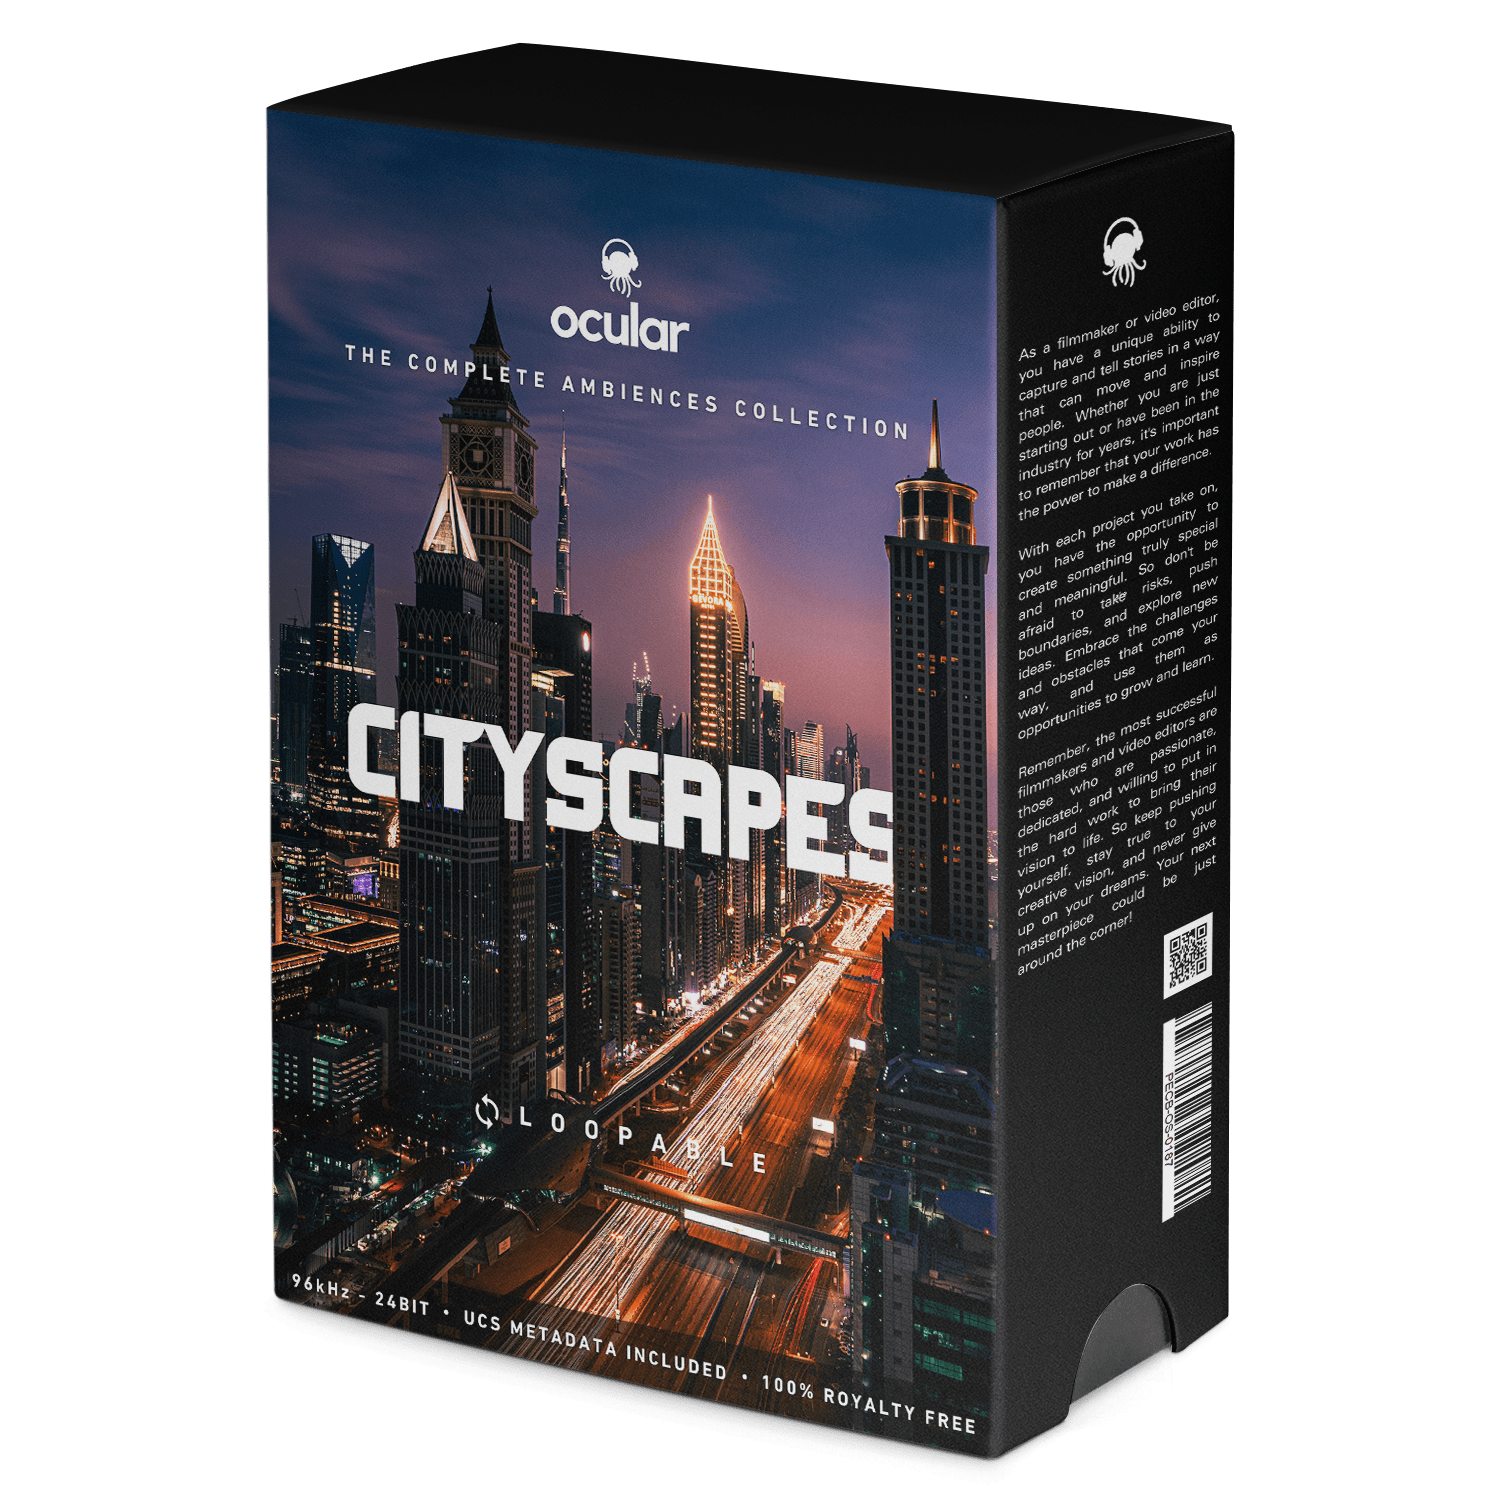 Cityscapes Ambiences Sound Effects for Video Editing. Live Recorded Ambient Soundscapes.